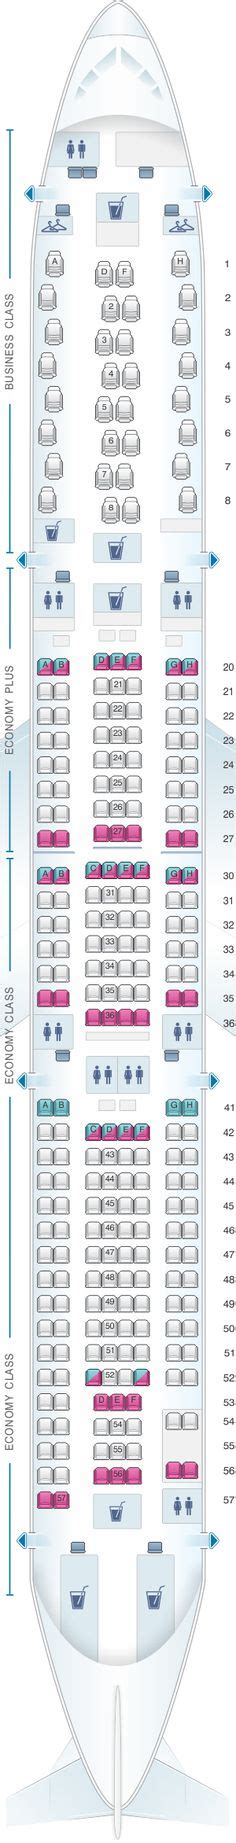 Seat Map For Lot Polish Airlines Boeing B787 Dreamliner Airlines